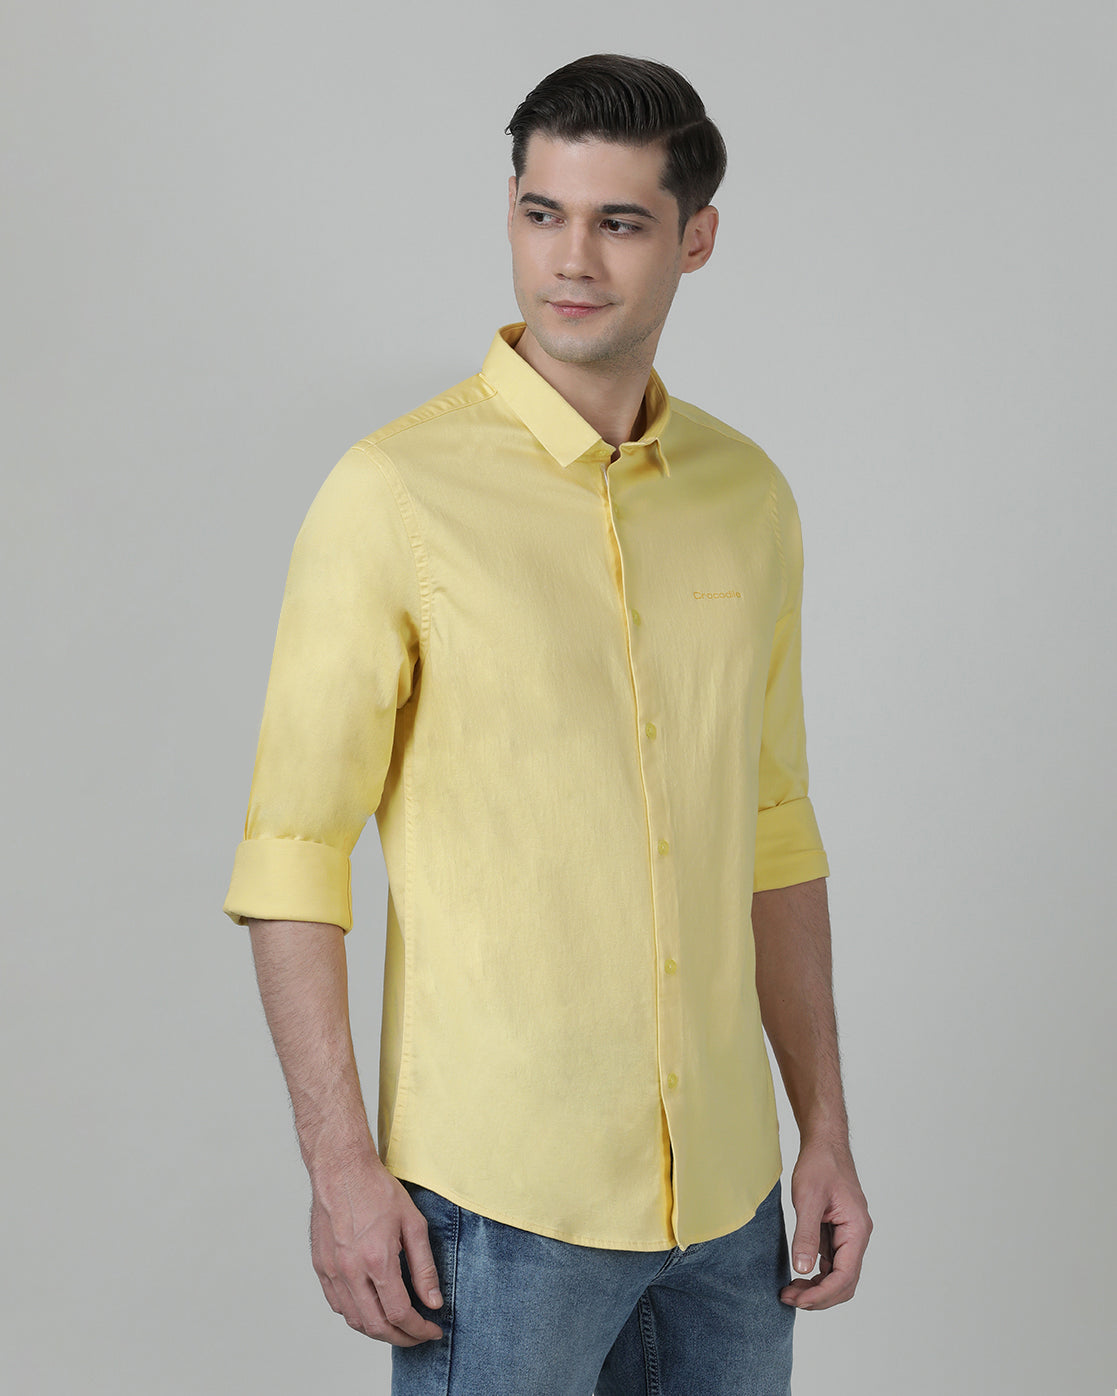 Crocodile Casual Solid Slim Fit Full Sleeve Butterscotch Shirt with Collar